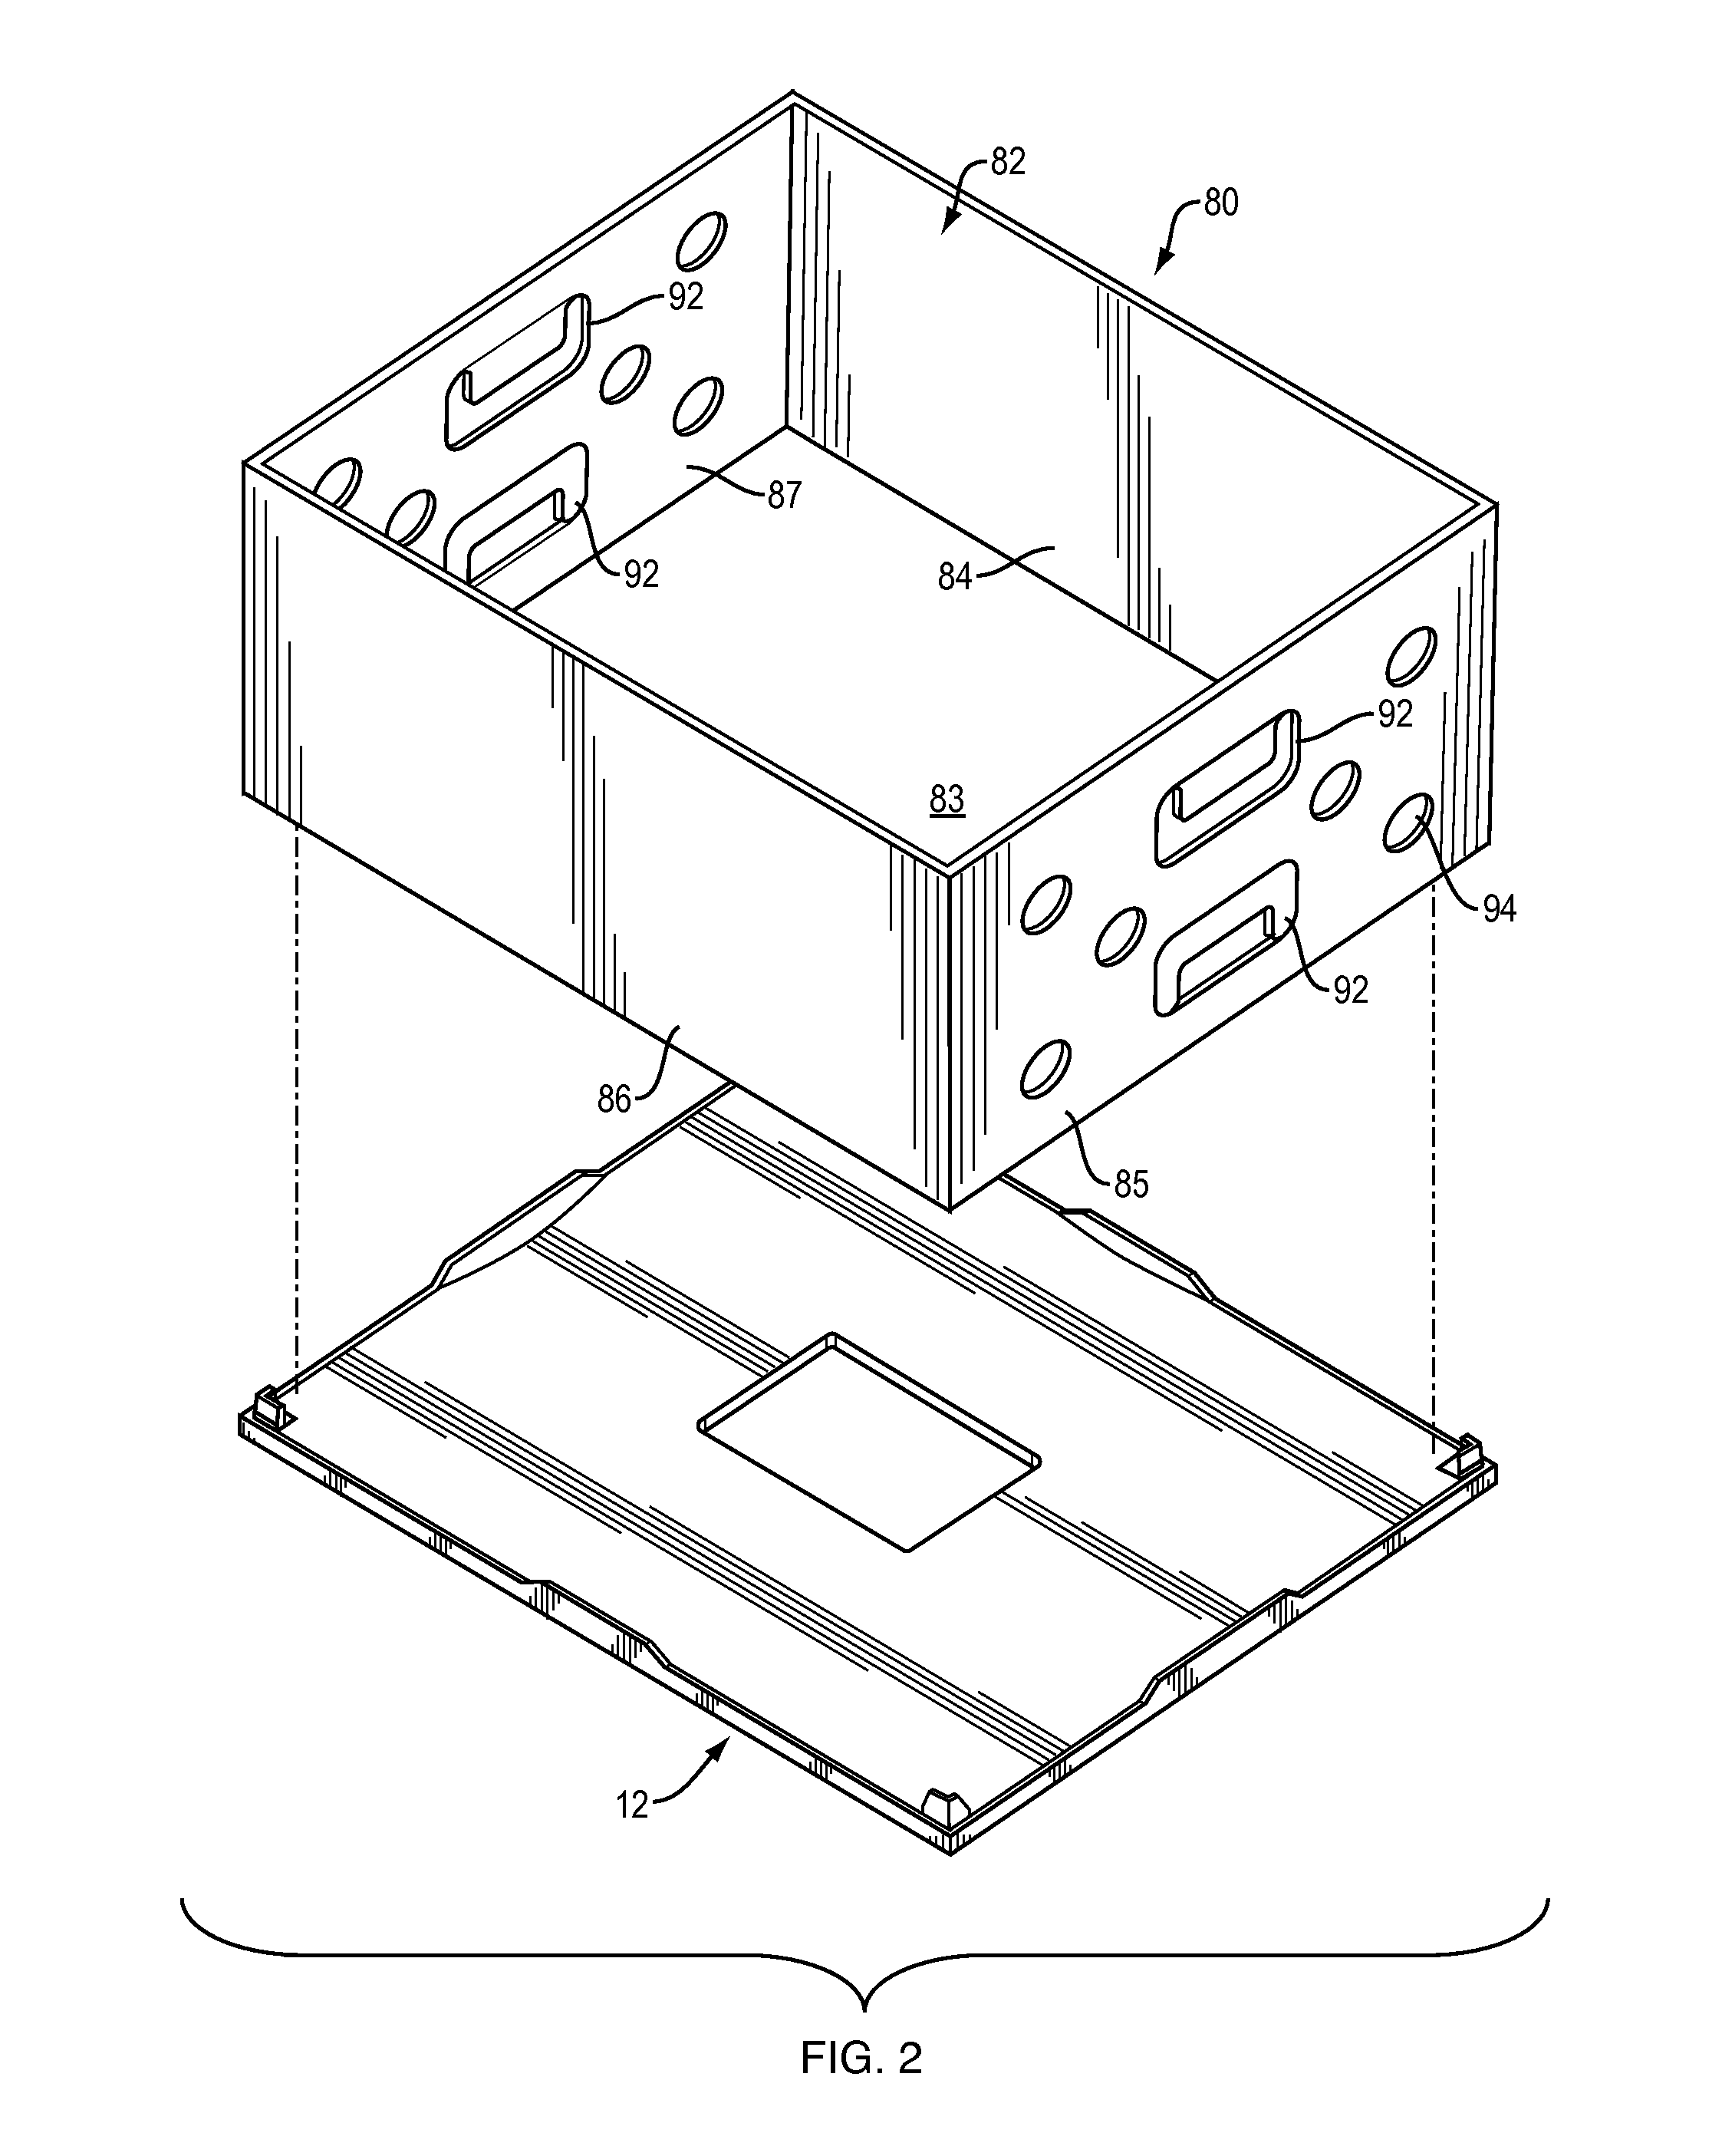 Reusable, combined multi-part product shipping box and display tray